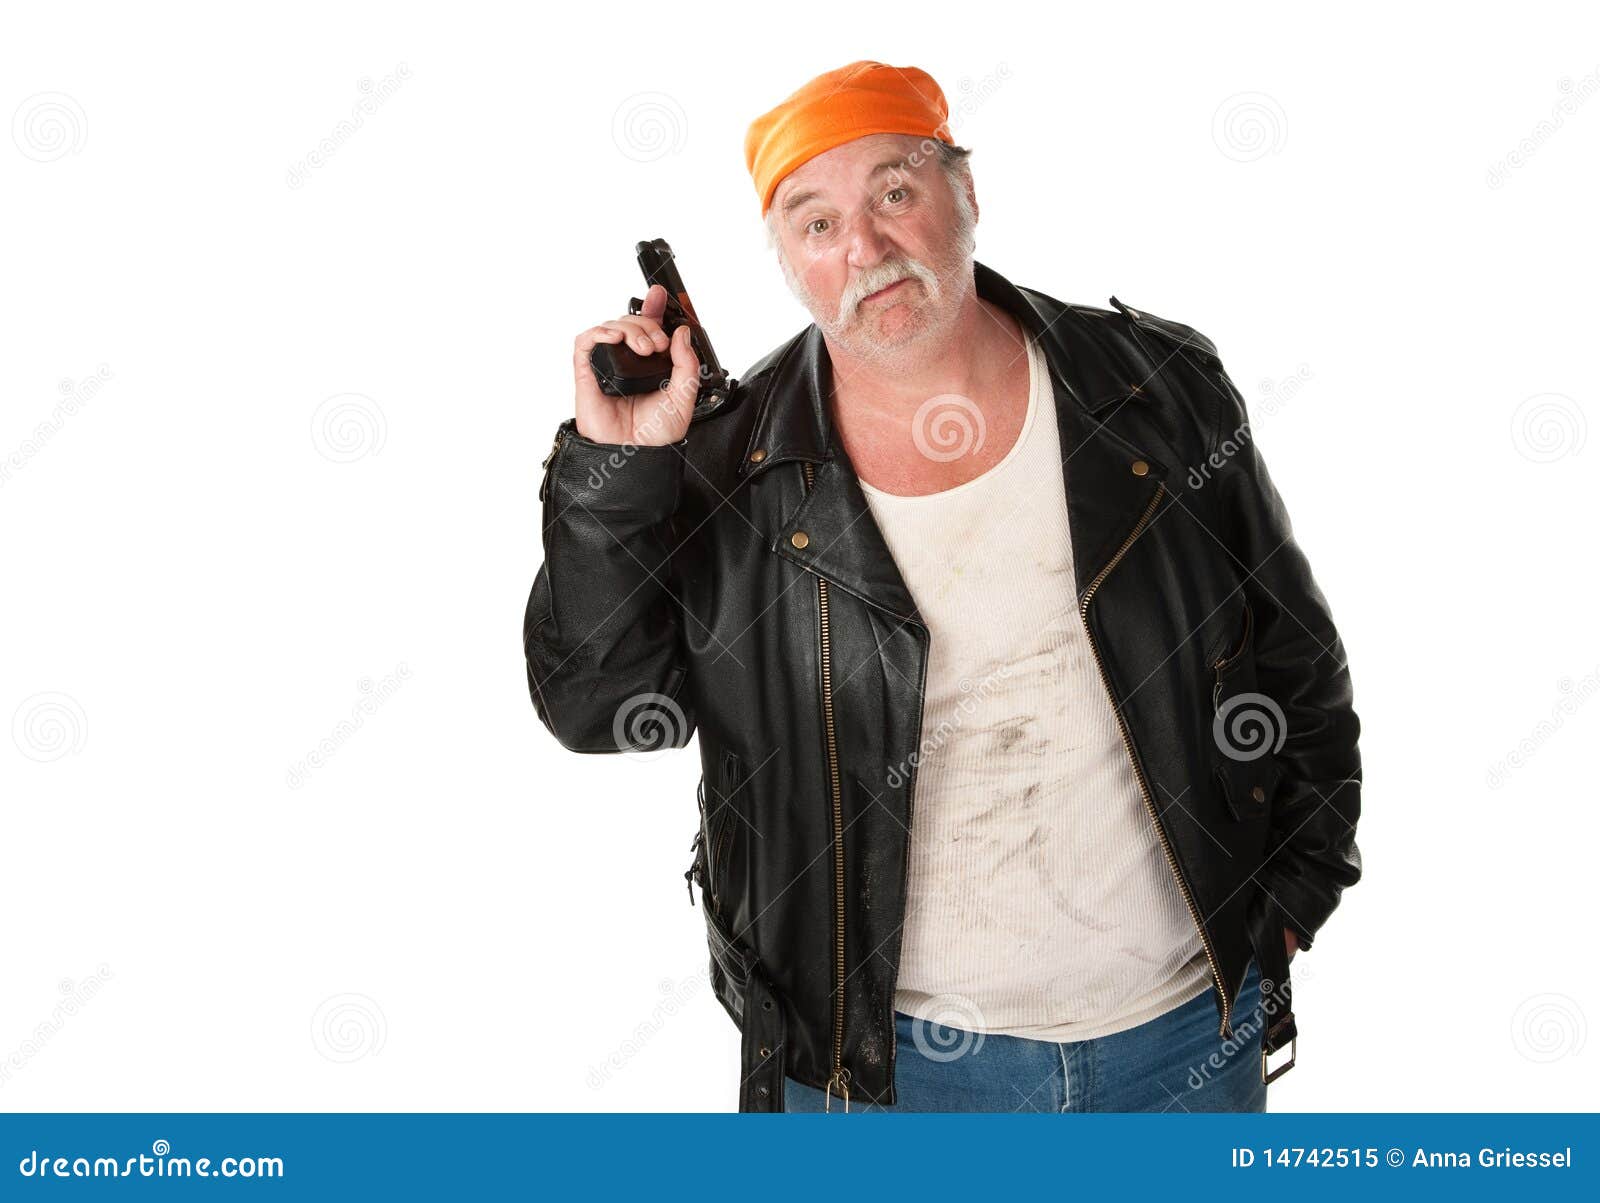 Carefree thug stock image. Image of beater, gray, male - 147425151300 x 994